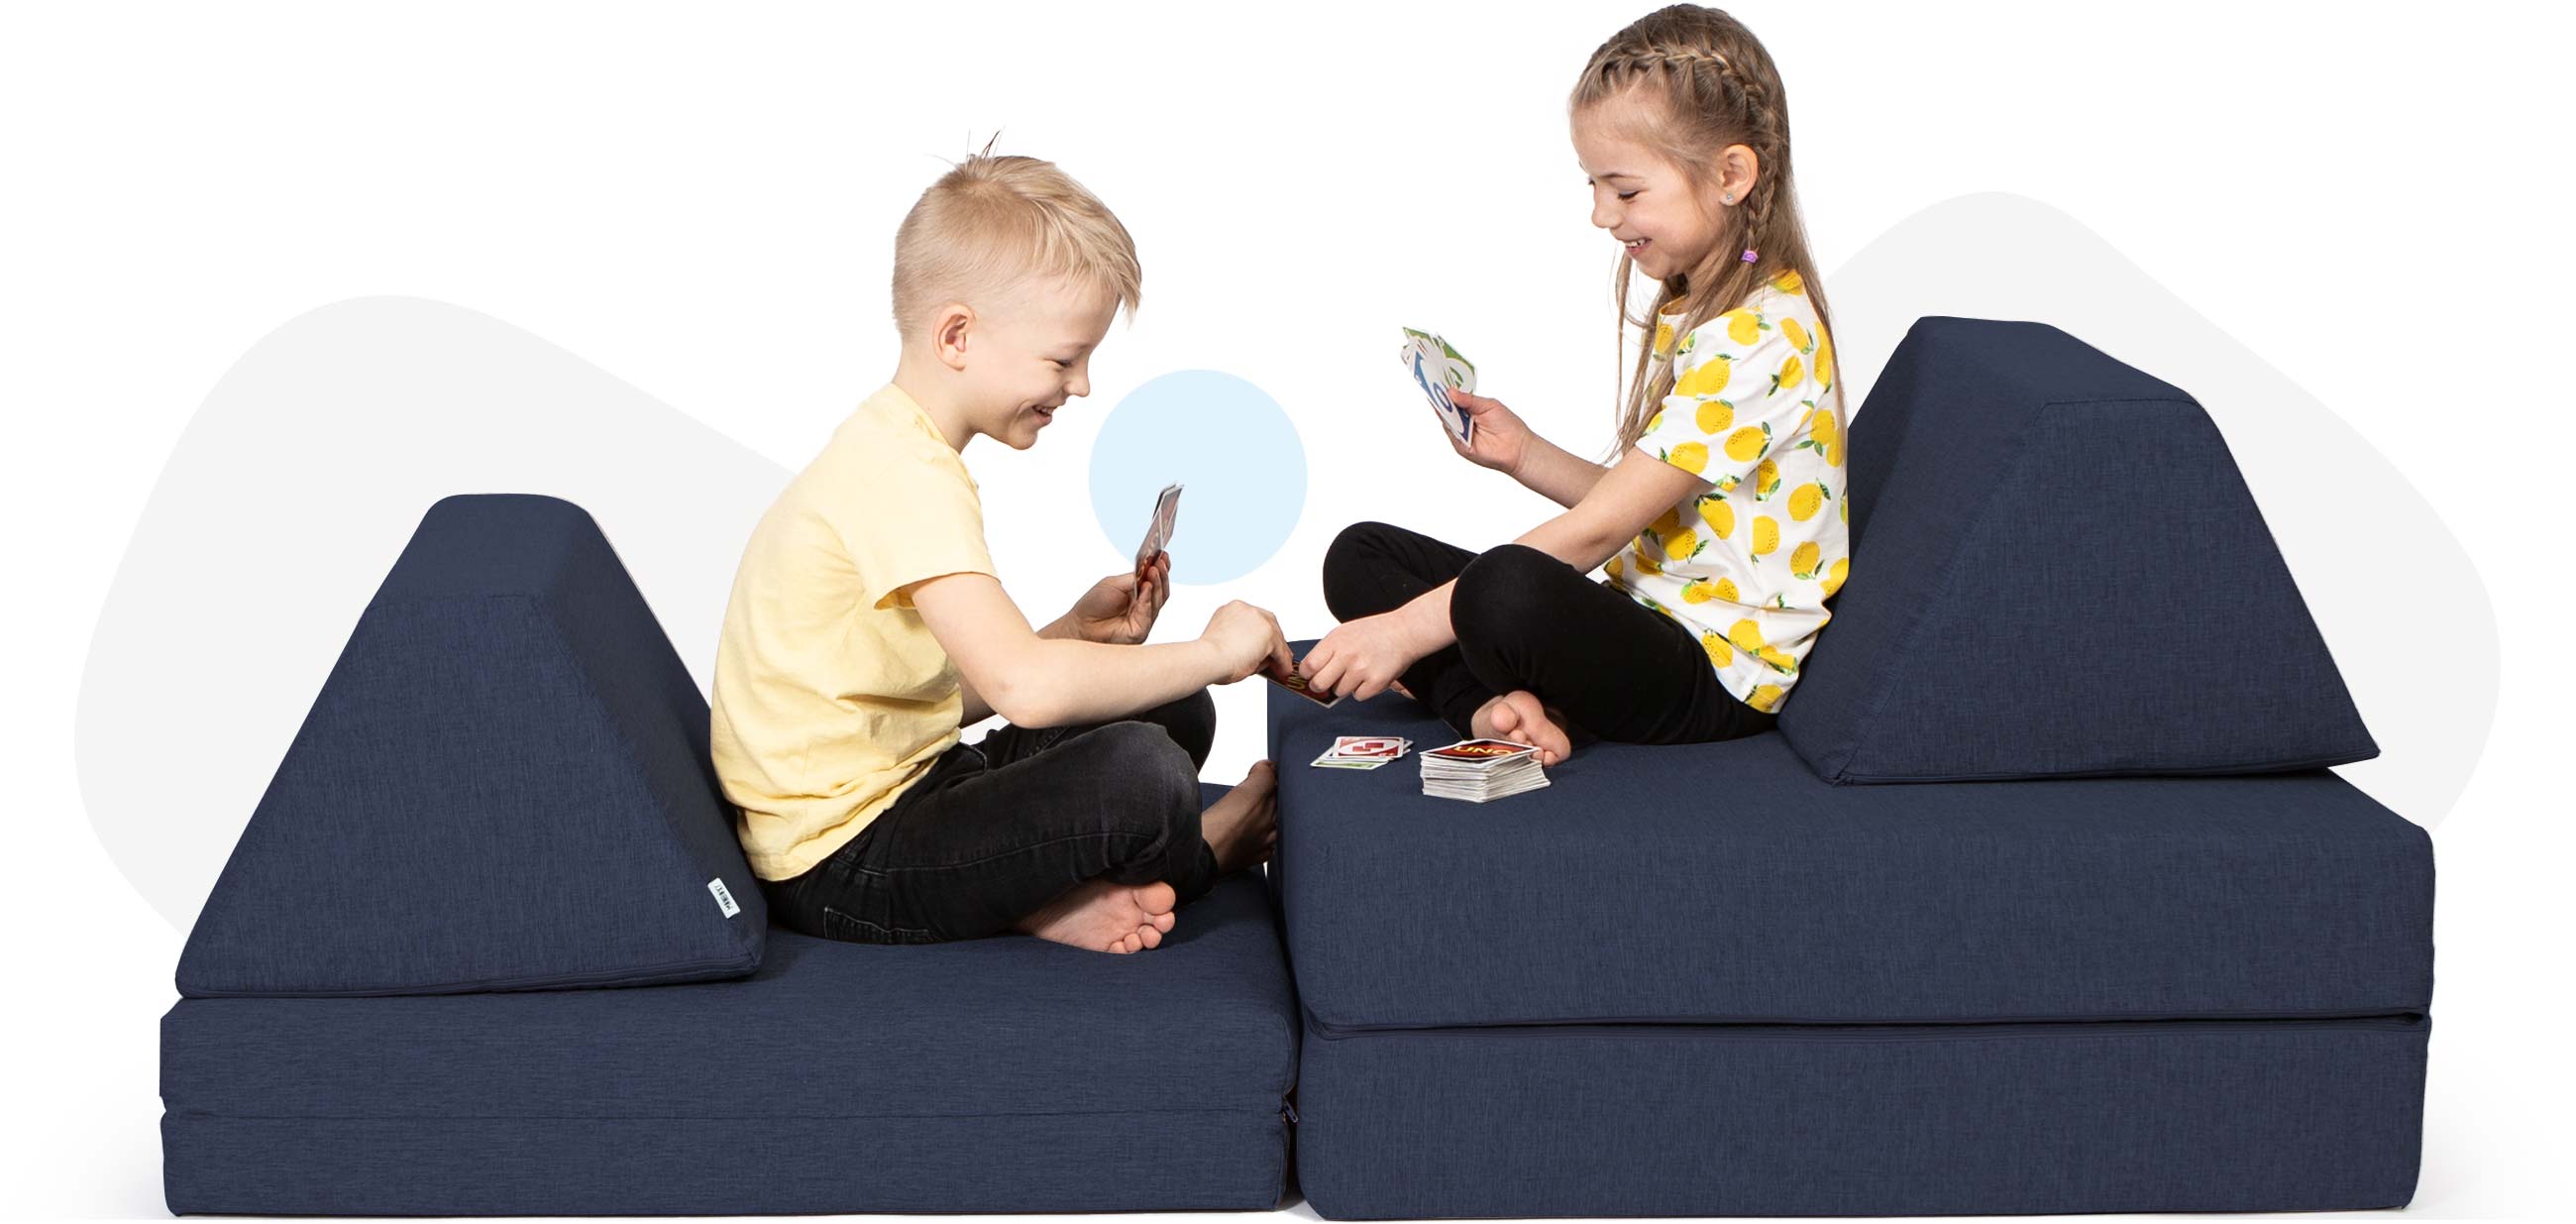 Kids sitting and playing cards on a navy blue Monboxy sofa